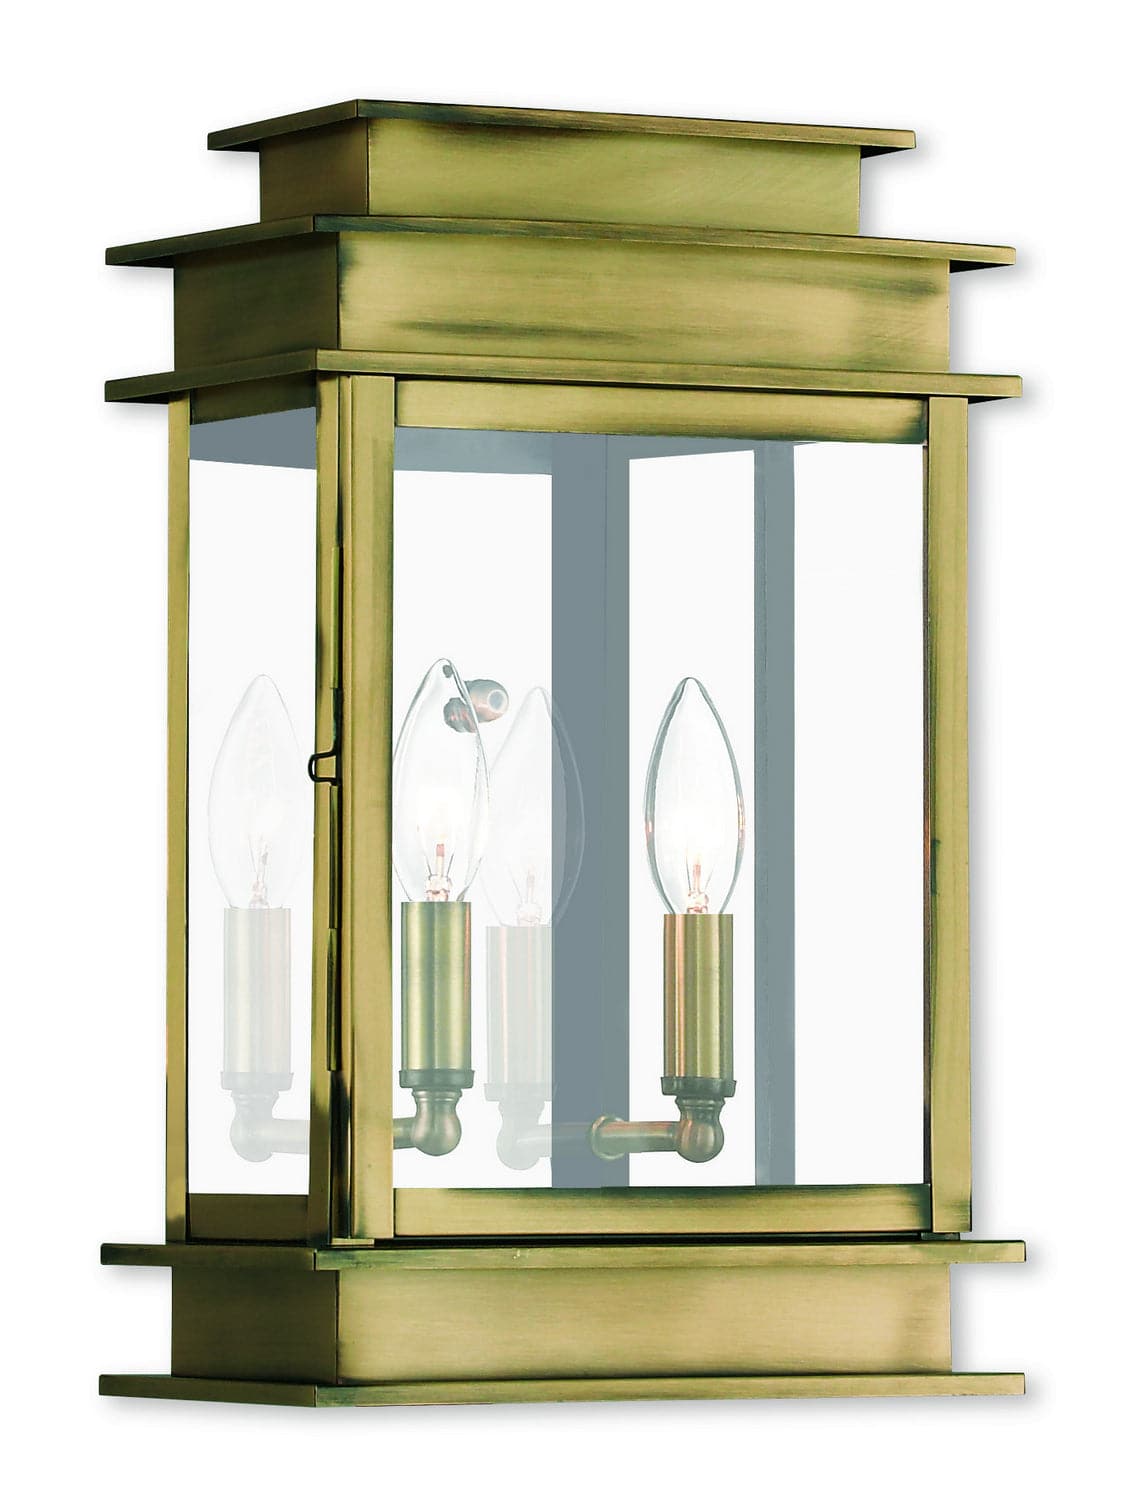 Livex Lighting - 2016-01 - Two Light Outdoor Wall Lantern - Princeton - Antique Brass w/ Polished Chrome Stainless Steel